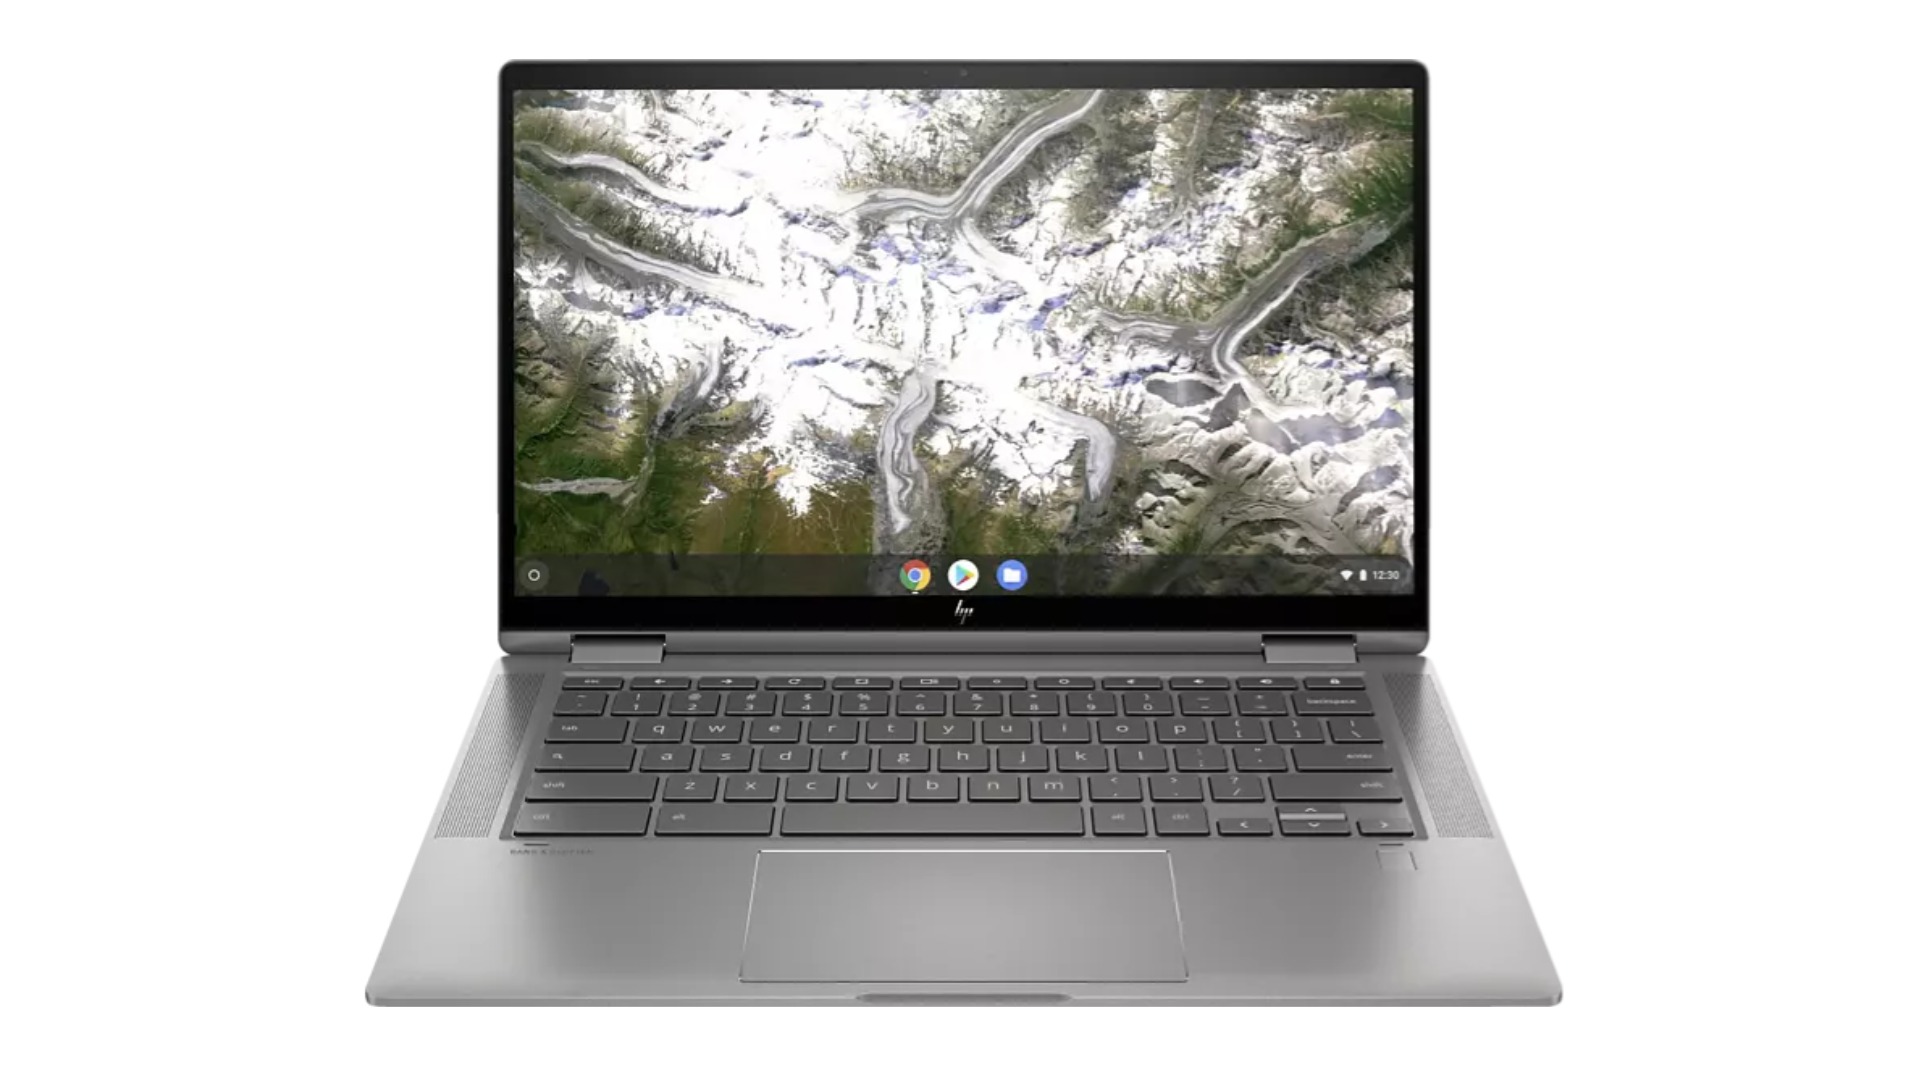 hp chromebook x360 review - an image of the laptop head on